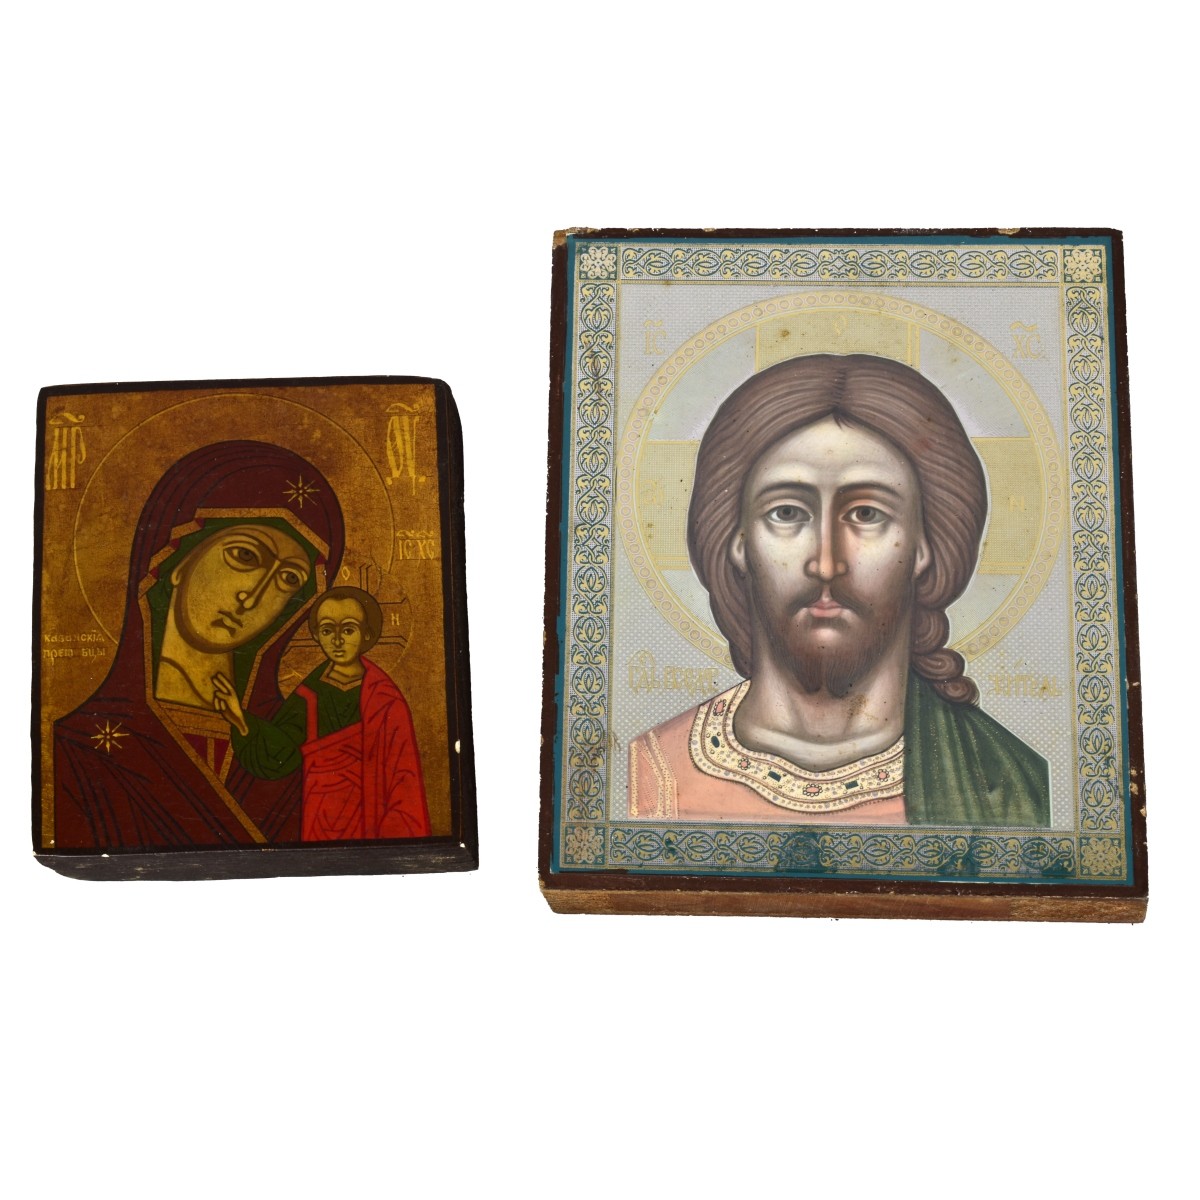 Ten (10) Russian Icons on wood